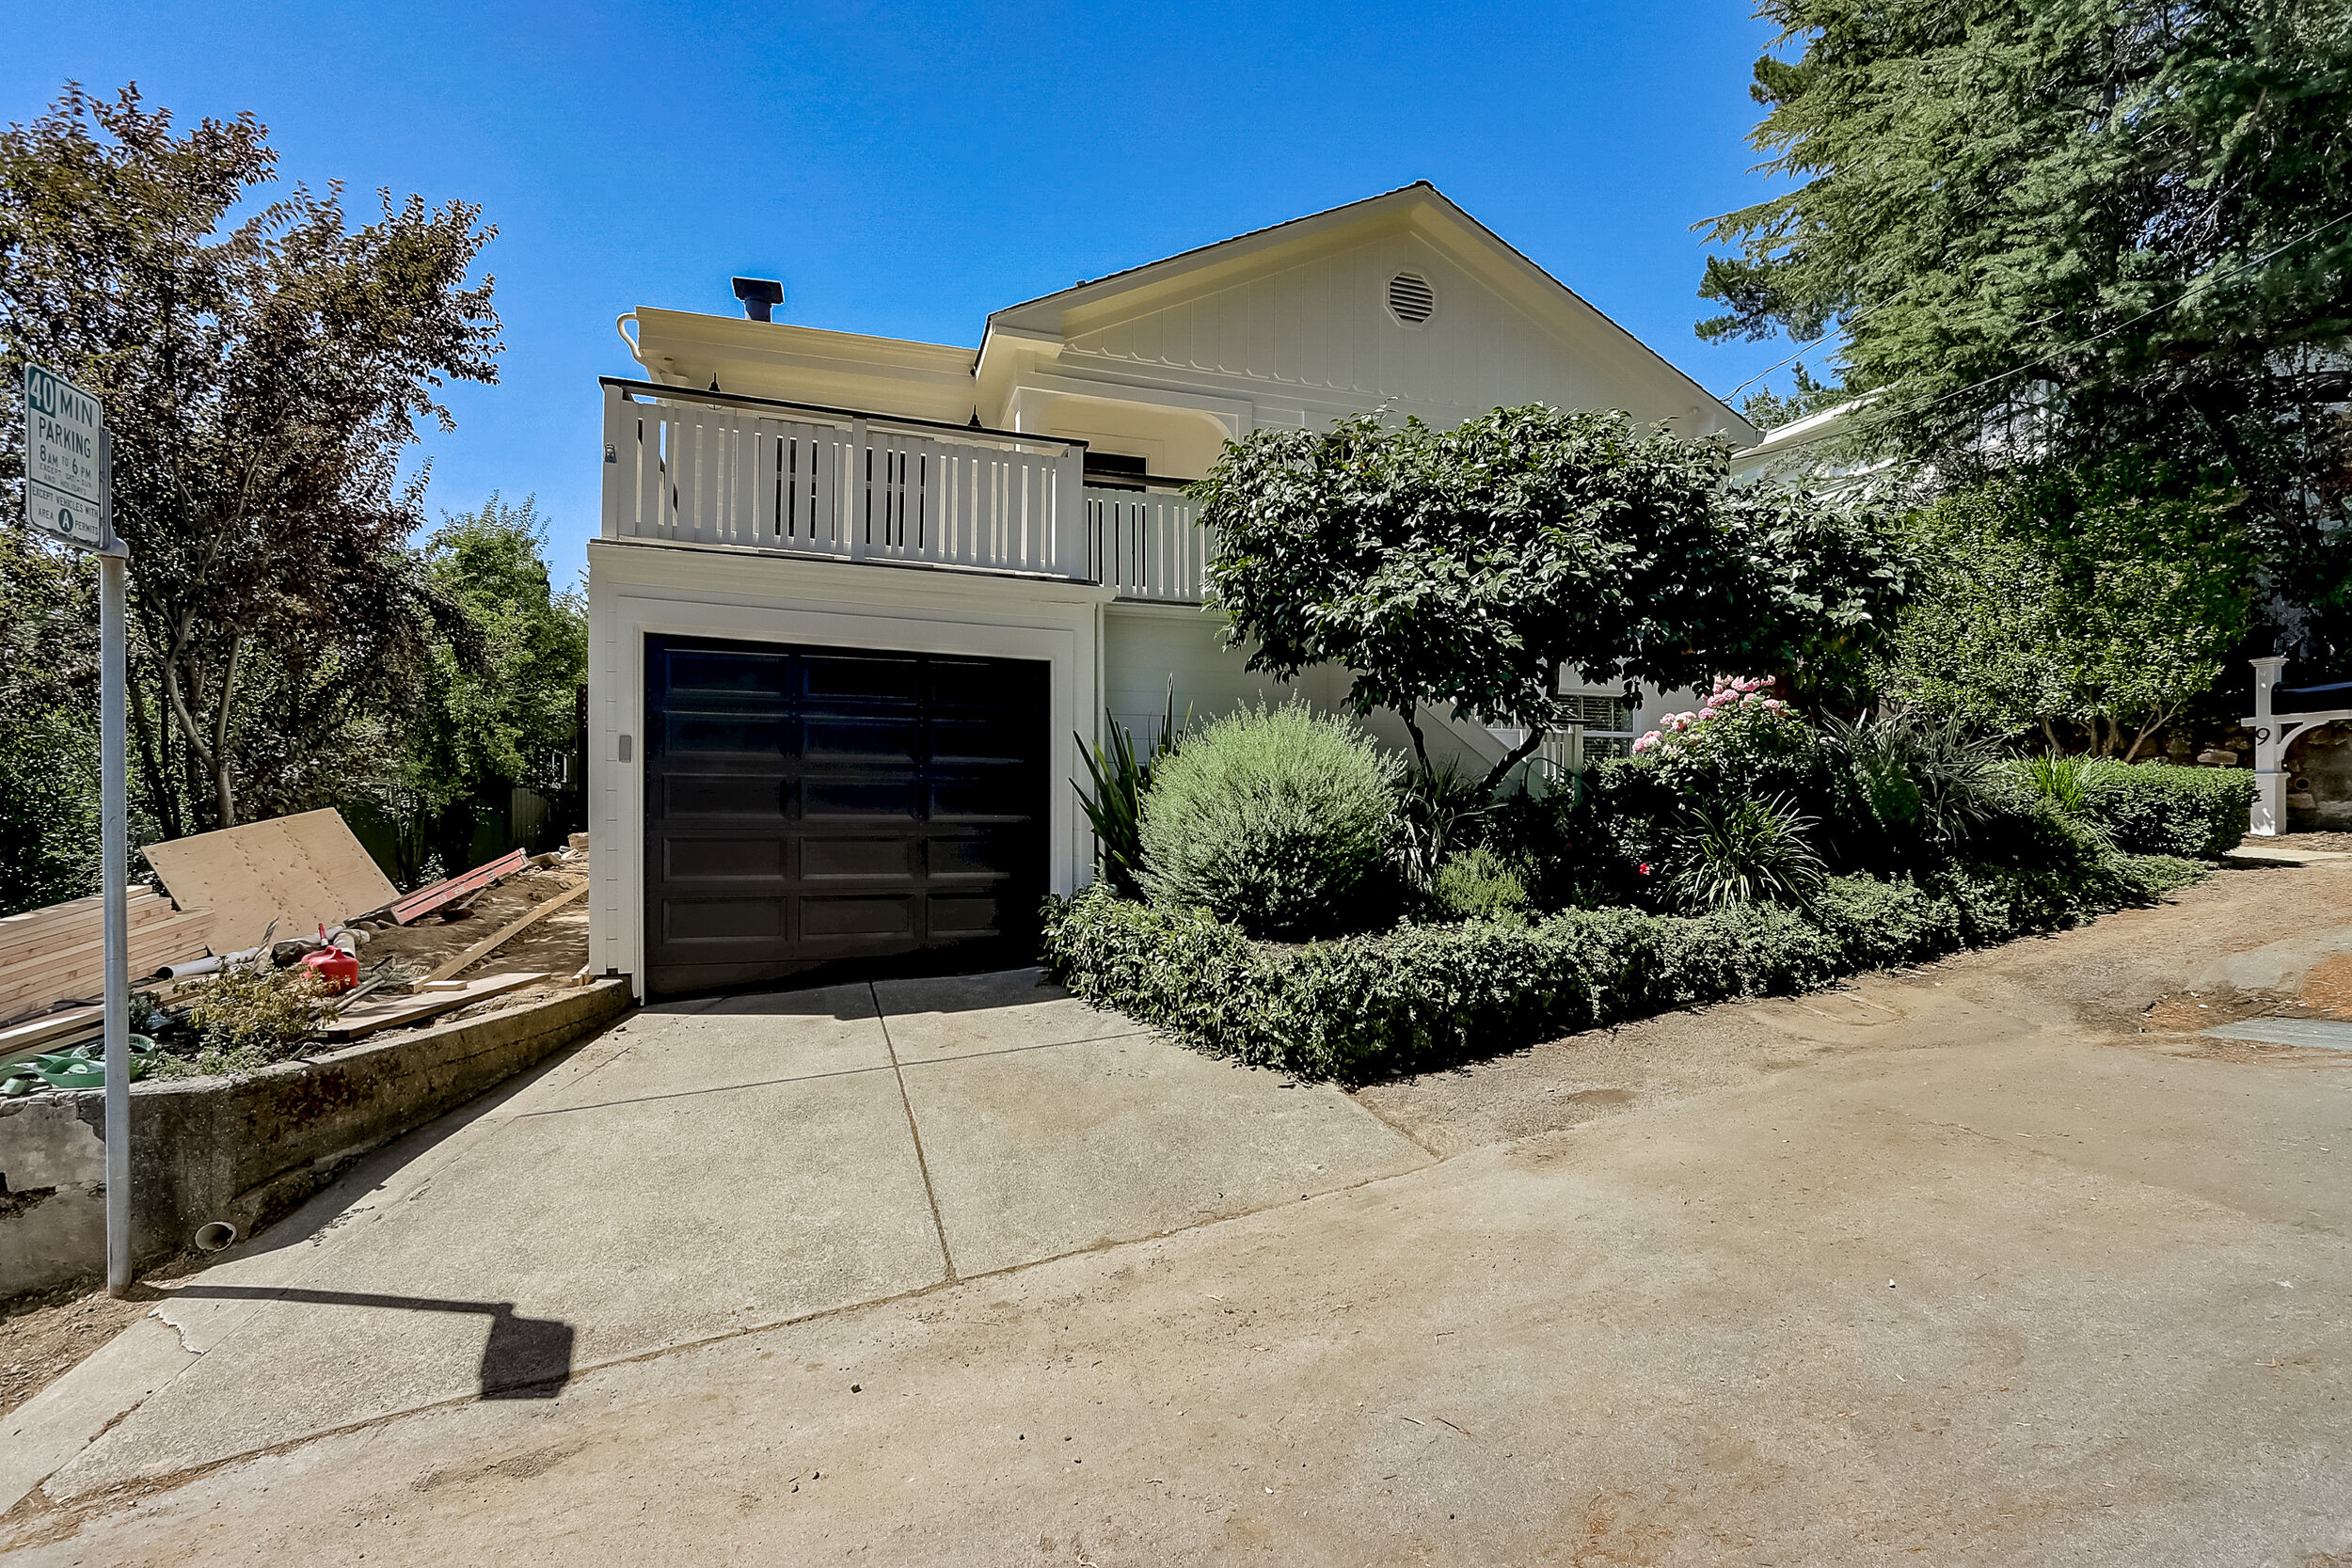 Own Marin Barr Haney Whitney Potter For Sale 9 Terrace Avenue, Kentfield California Marin County #1 Real Esate Agents-34.jpg